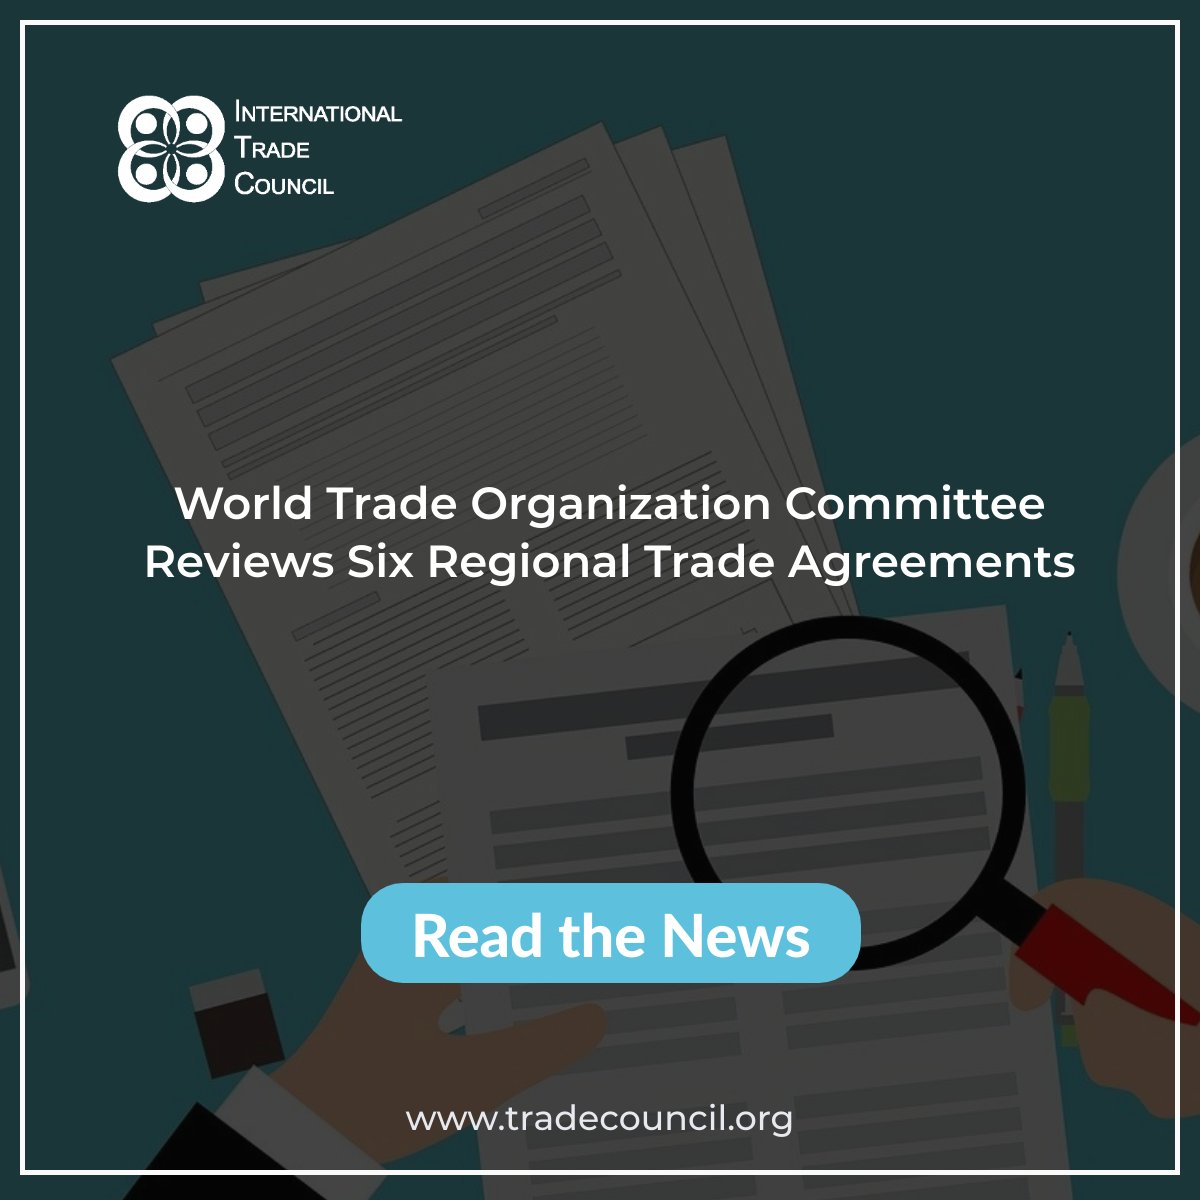 World Trade Organization Committee Reviews Six Regional Trade Agreements
Read The News: tradecouncil.org/world-trade-or…
#ITCNewsUpdates #BreakingNews #WTOReview #RegionalTrade #EconomicPartnerships #TradeAgreements #GlobalTrade #NewsUpdate